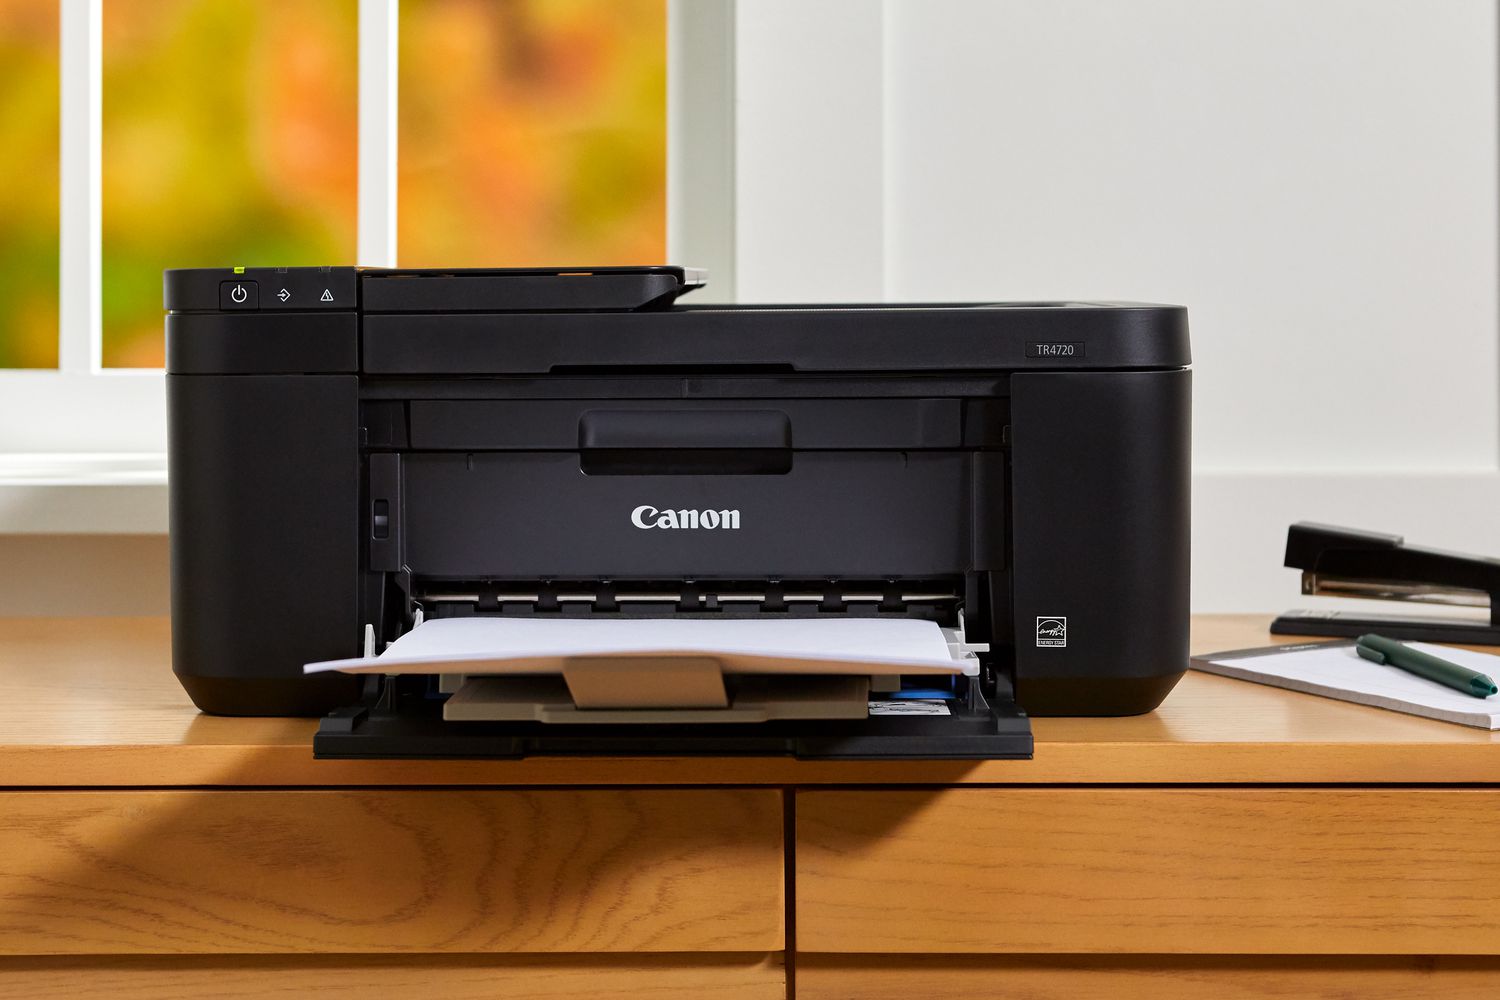 Which Printer is Best For Home Use?